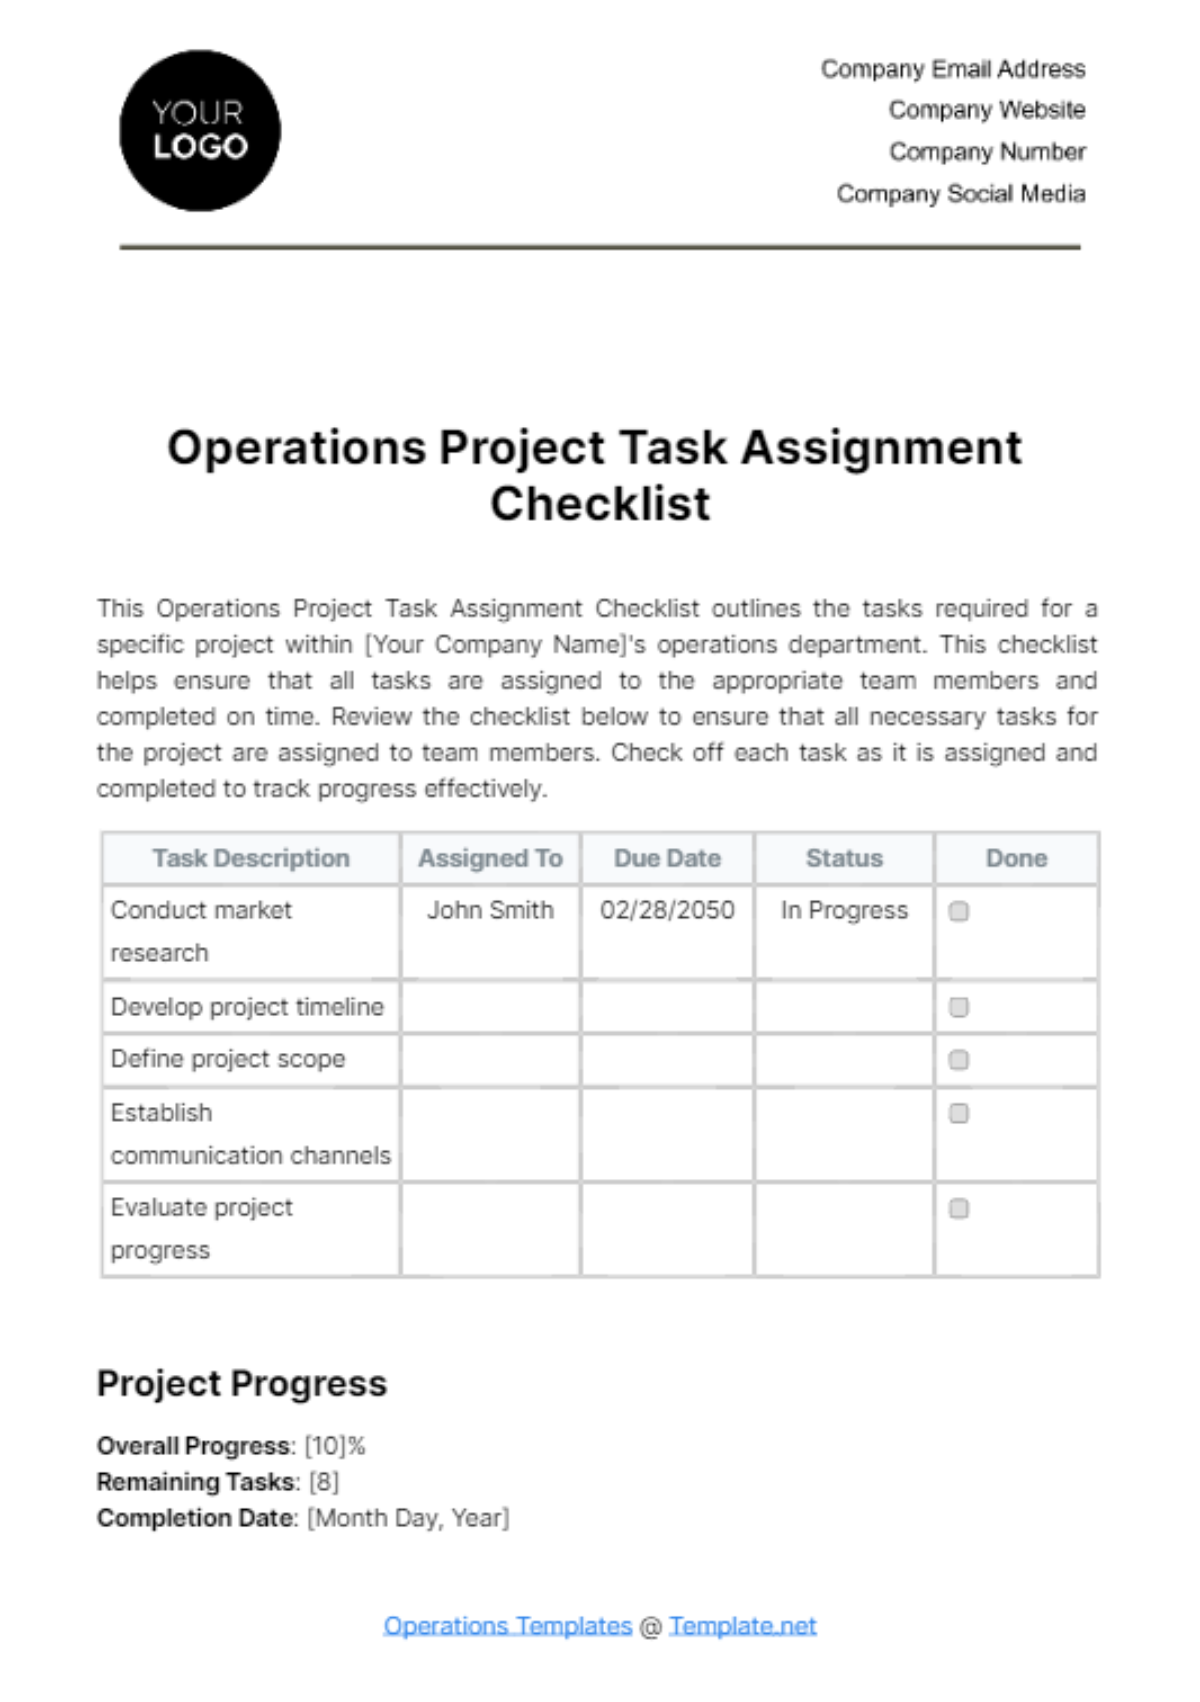 Operations Project Task Assignment Checklist Template